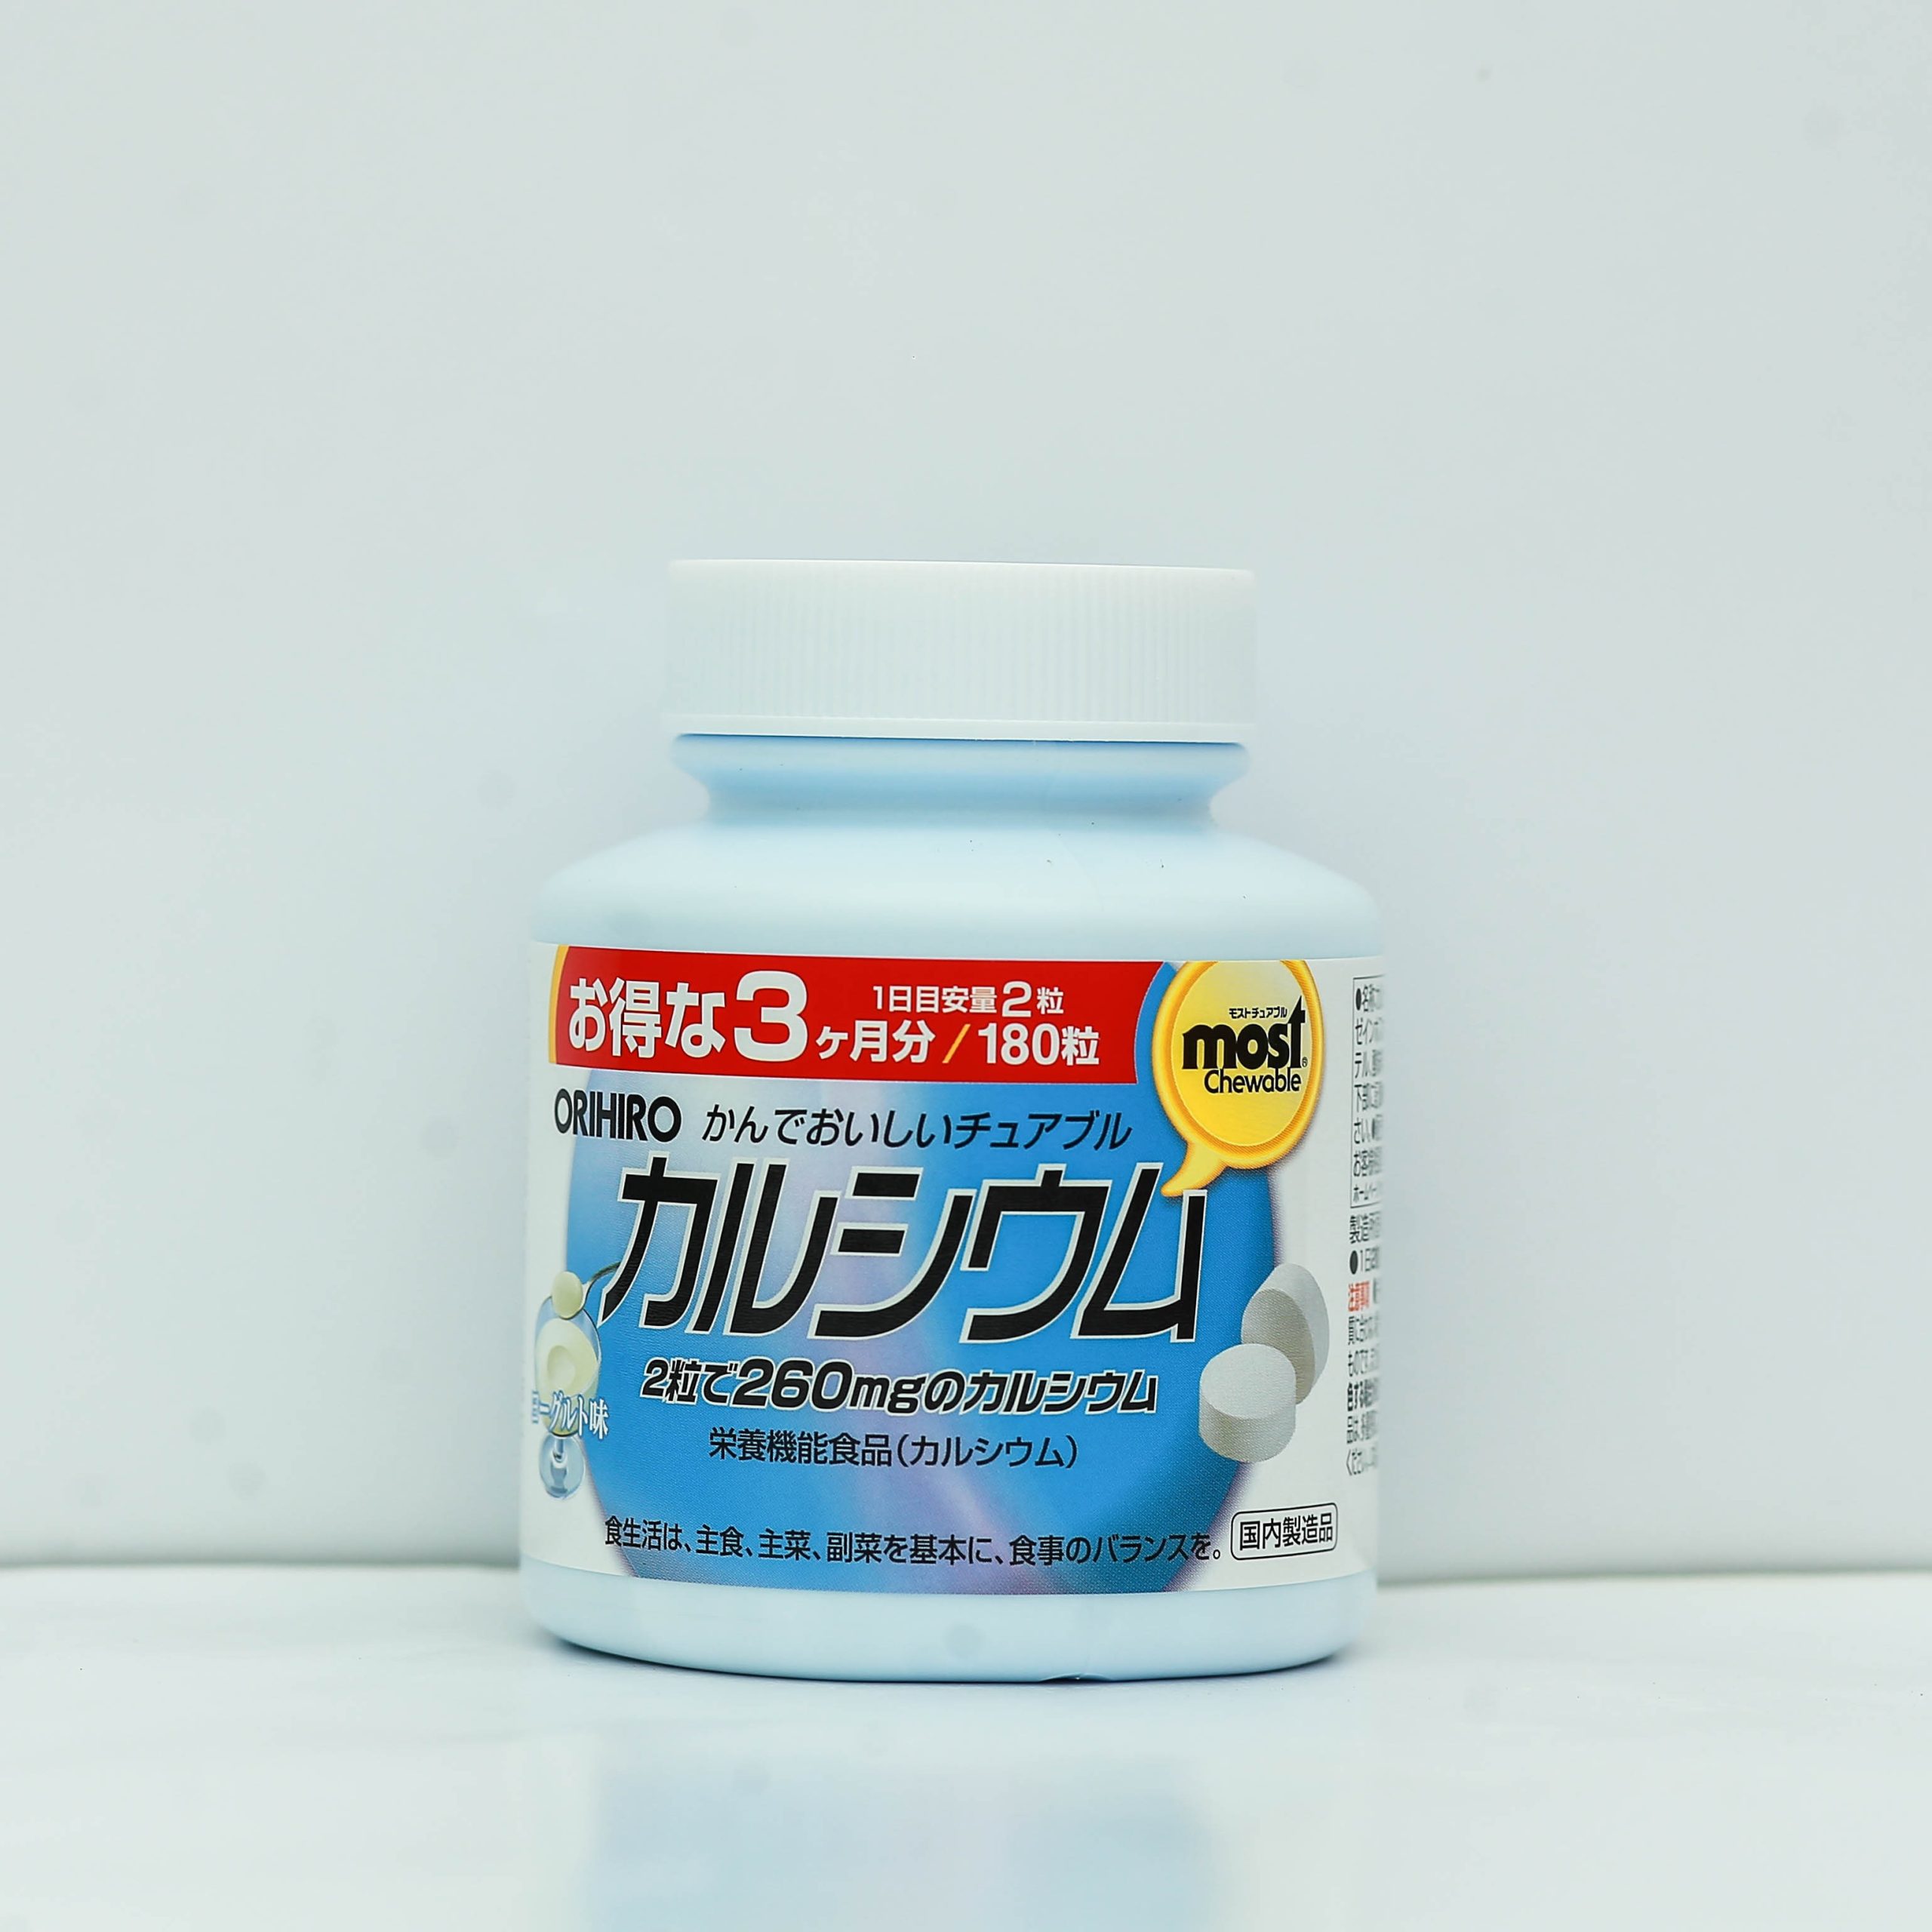 keo bo sung canxi orihiro most chewable nhat ban scaled